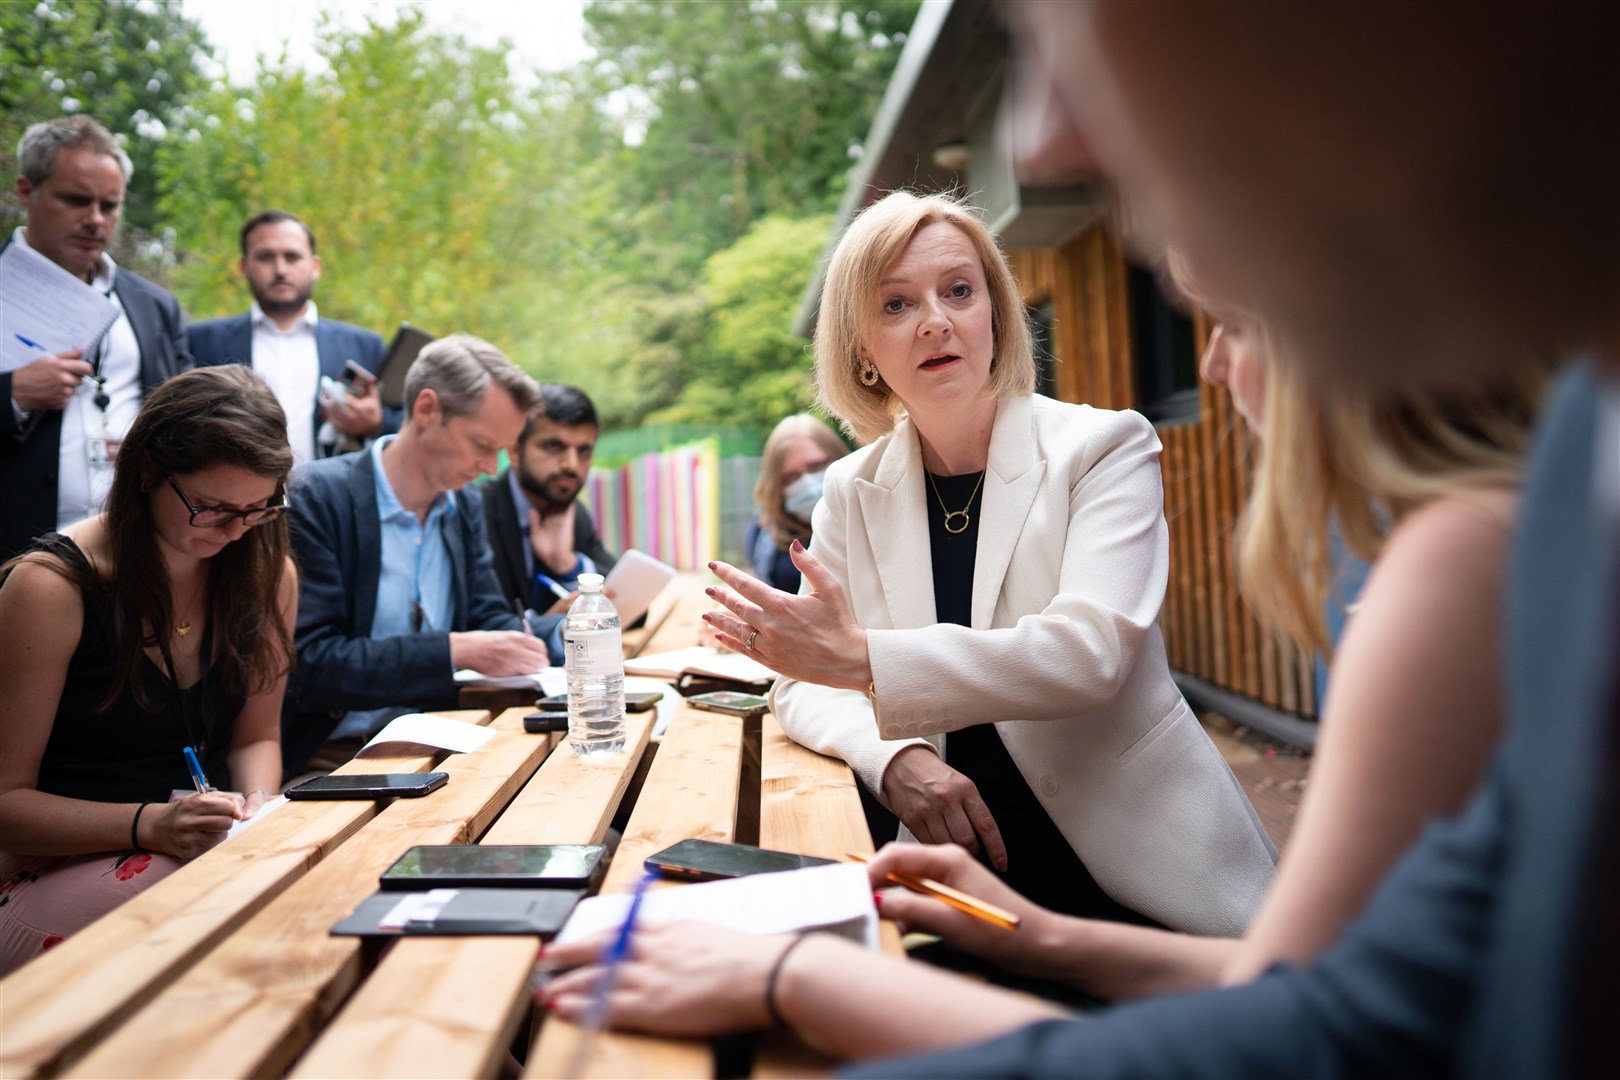 Liz Truss speaks to the press during a visit to the children’s charity Little Miracles in Peterborough (Stefan Rousseau/PA)